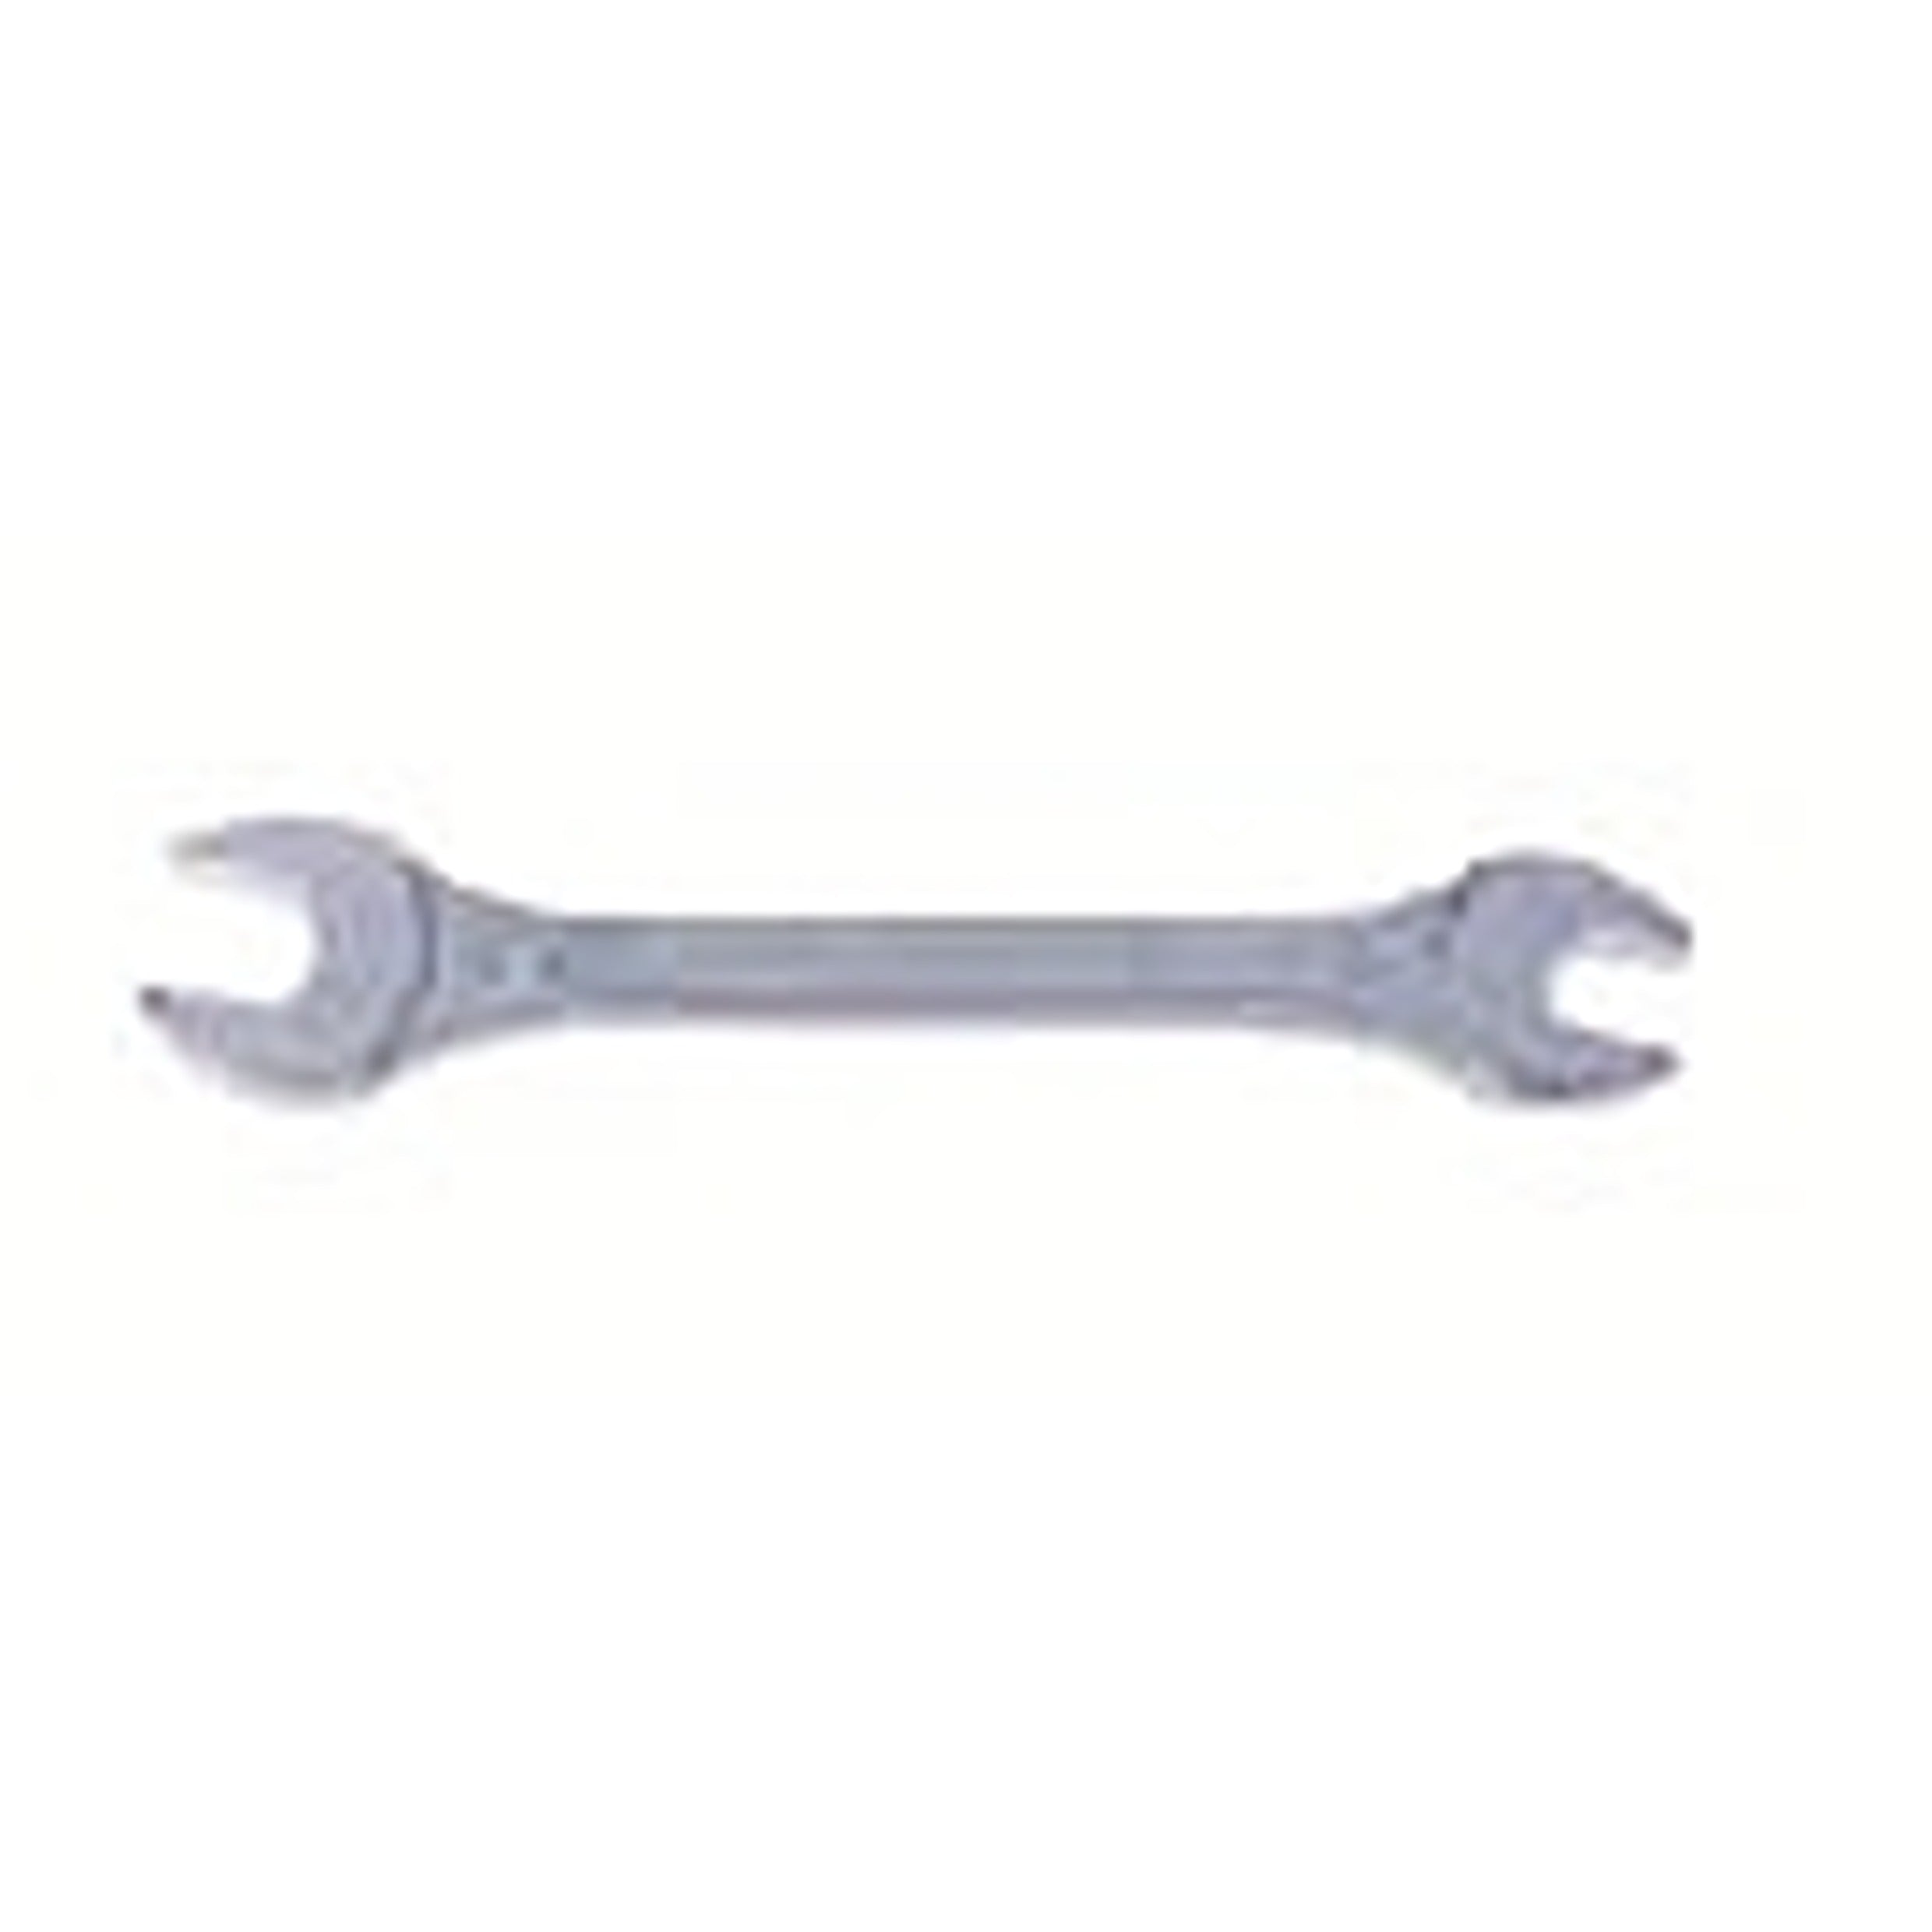 BRITOOL 2JM Open Jaw Wrenches - Metric (BRITOOL) - Premium Open Jaw Wrench from BRITOOL - Shop now at Yew Aik.